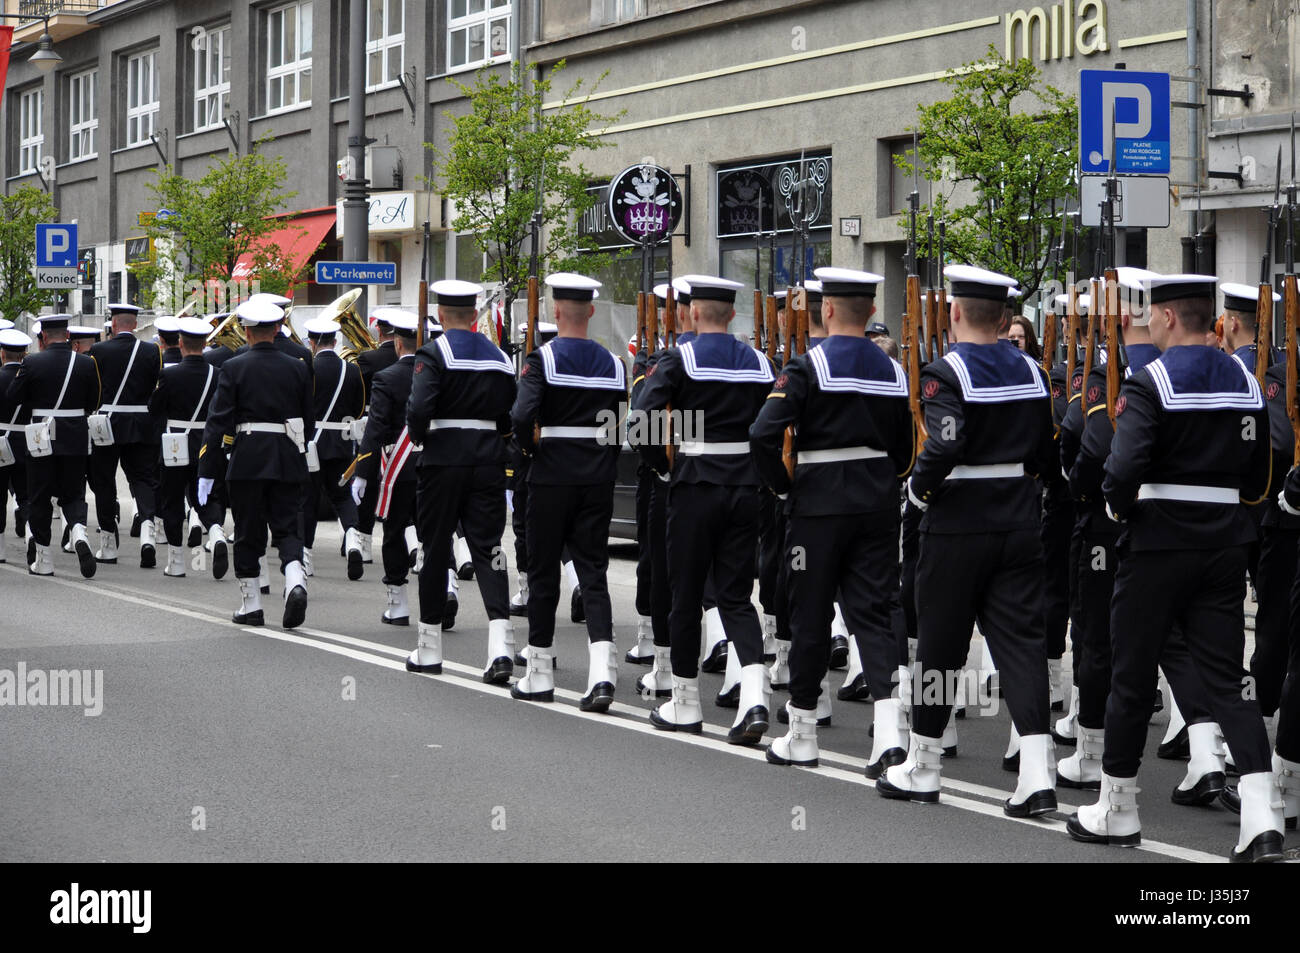 Gdynia, Poland; 3rd May 2017; soldiers marching on the main street, soldiers from polish navy, Constitution Day parade in Gdynia, Mariia Kamenska/Alamy Live news Stock Photo